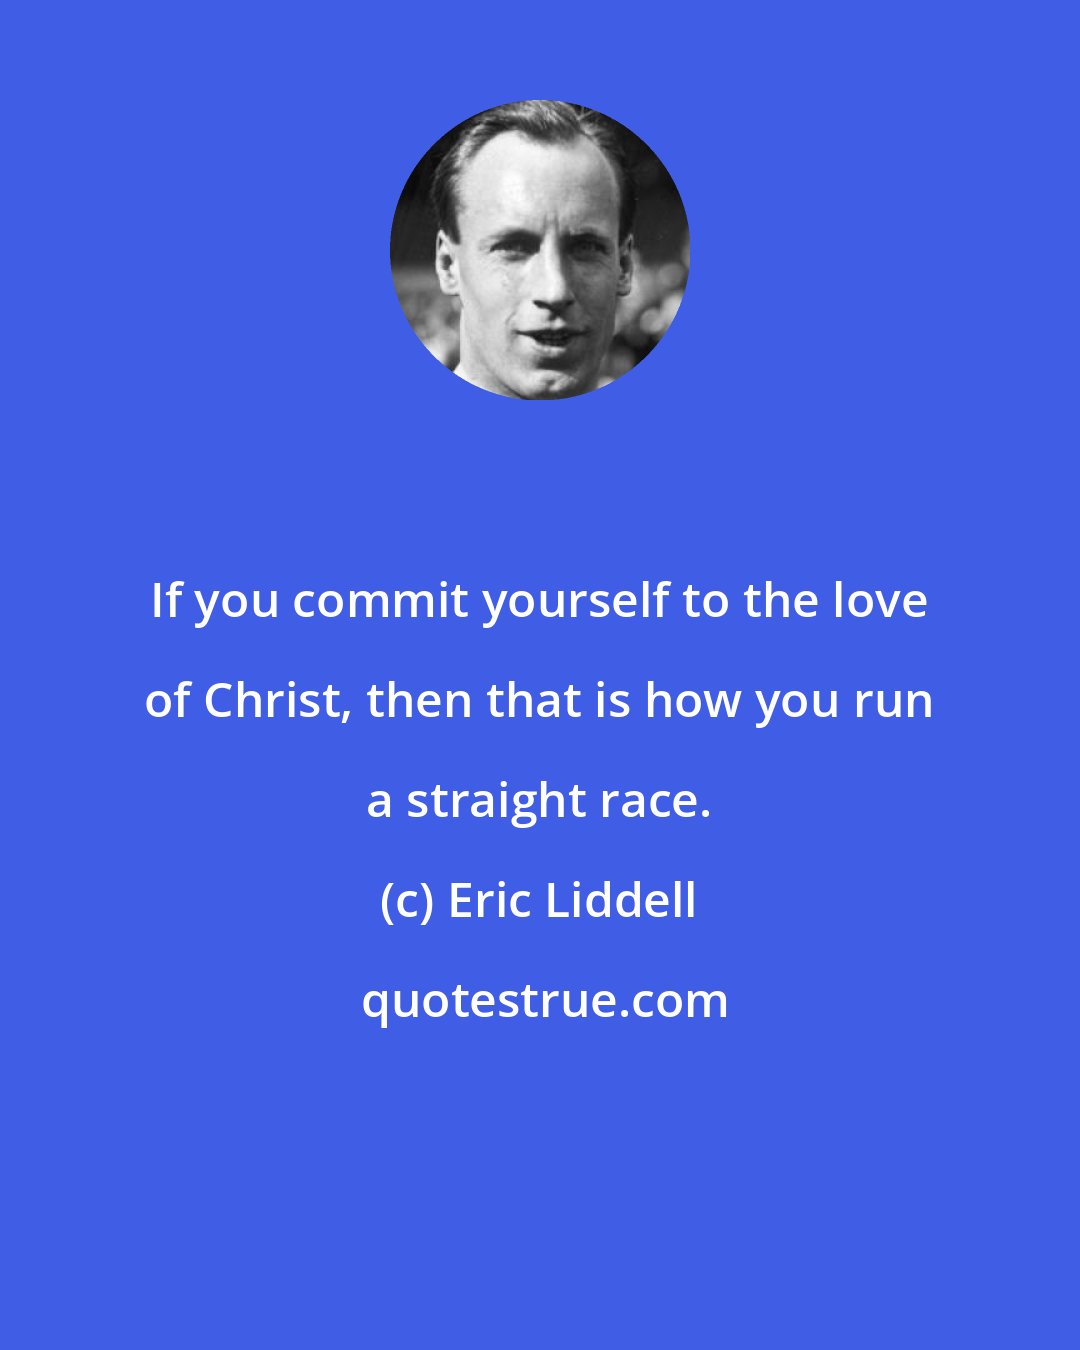 Eric Liddell: If you commit yourself to the love of Christ, then that is how you run a straight race.